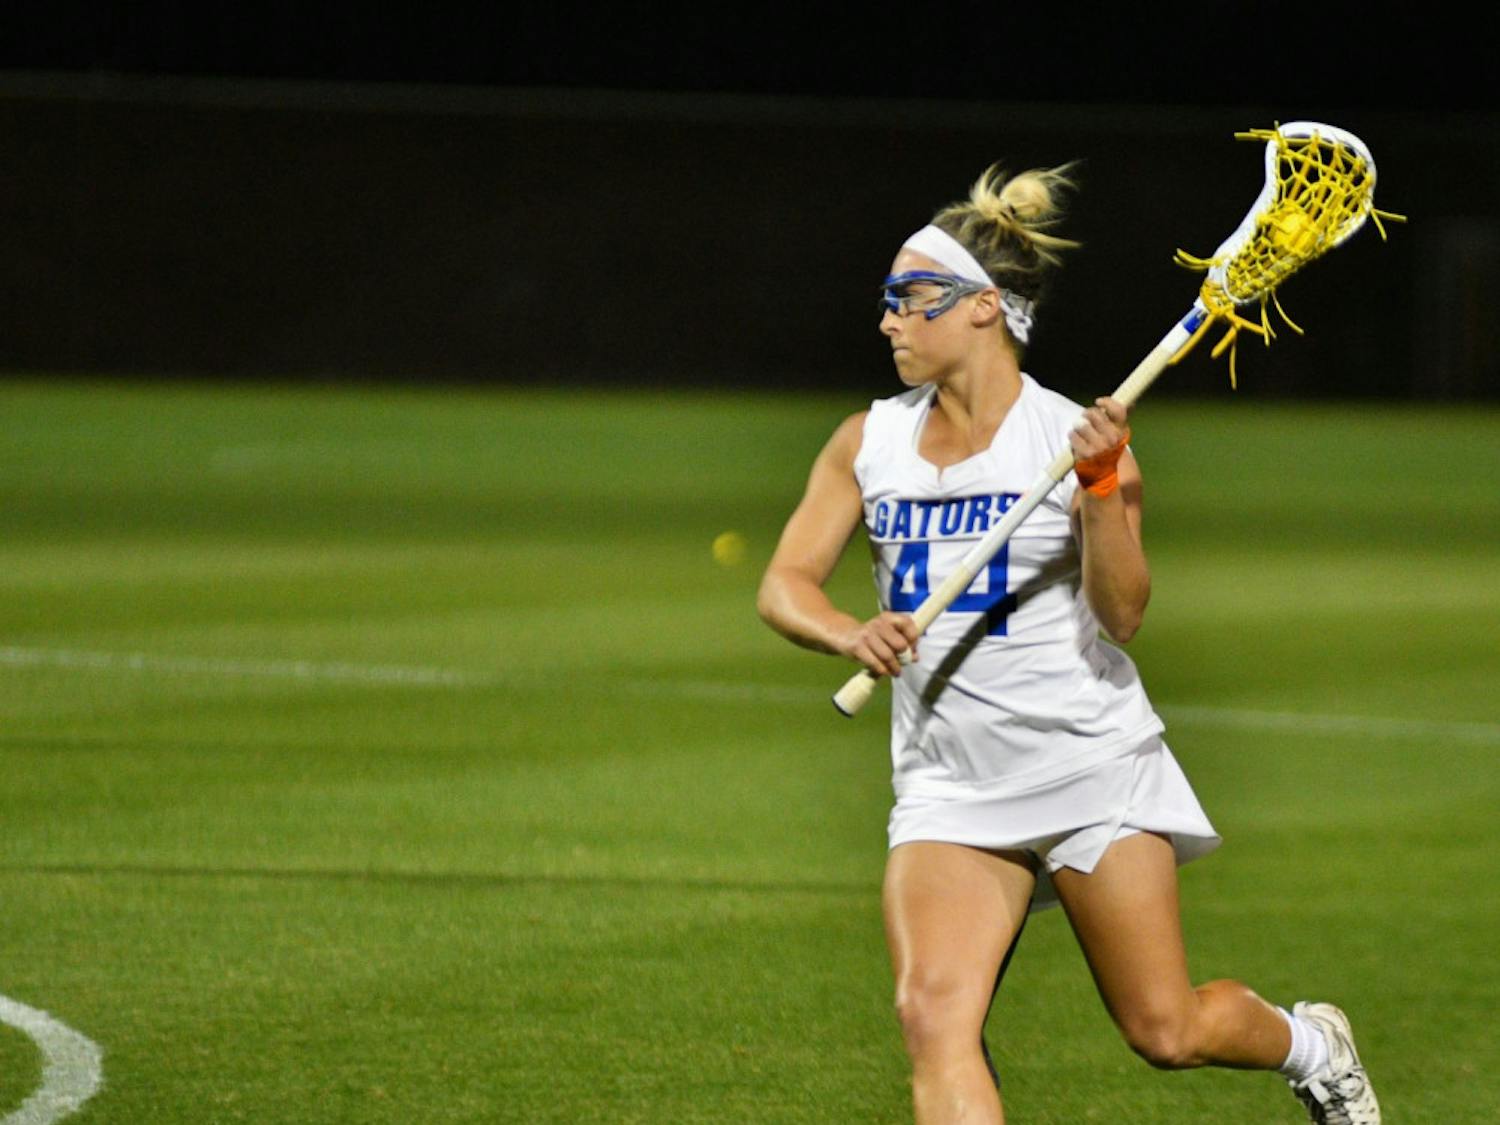 UF midfielder scored just one goal in Florida's 14-13 loss to Navy in Annapolis, Maryland, on Saturday.